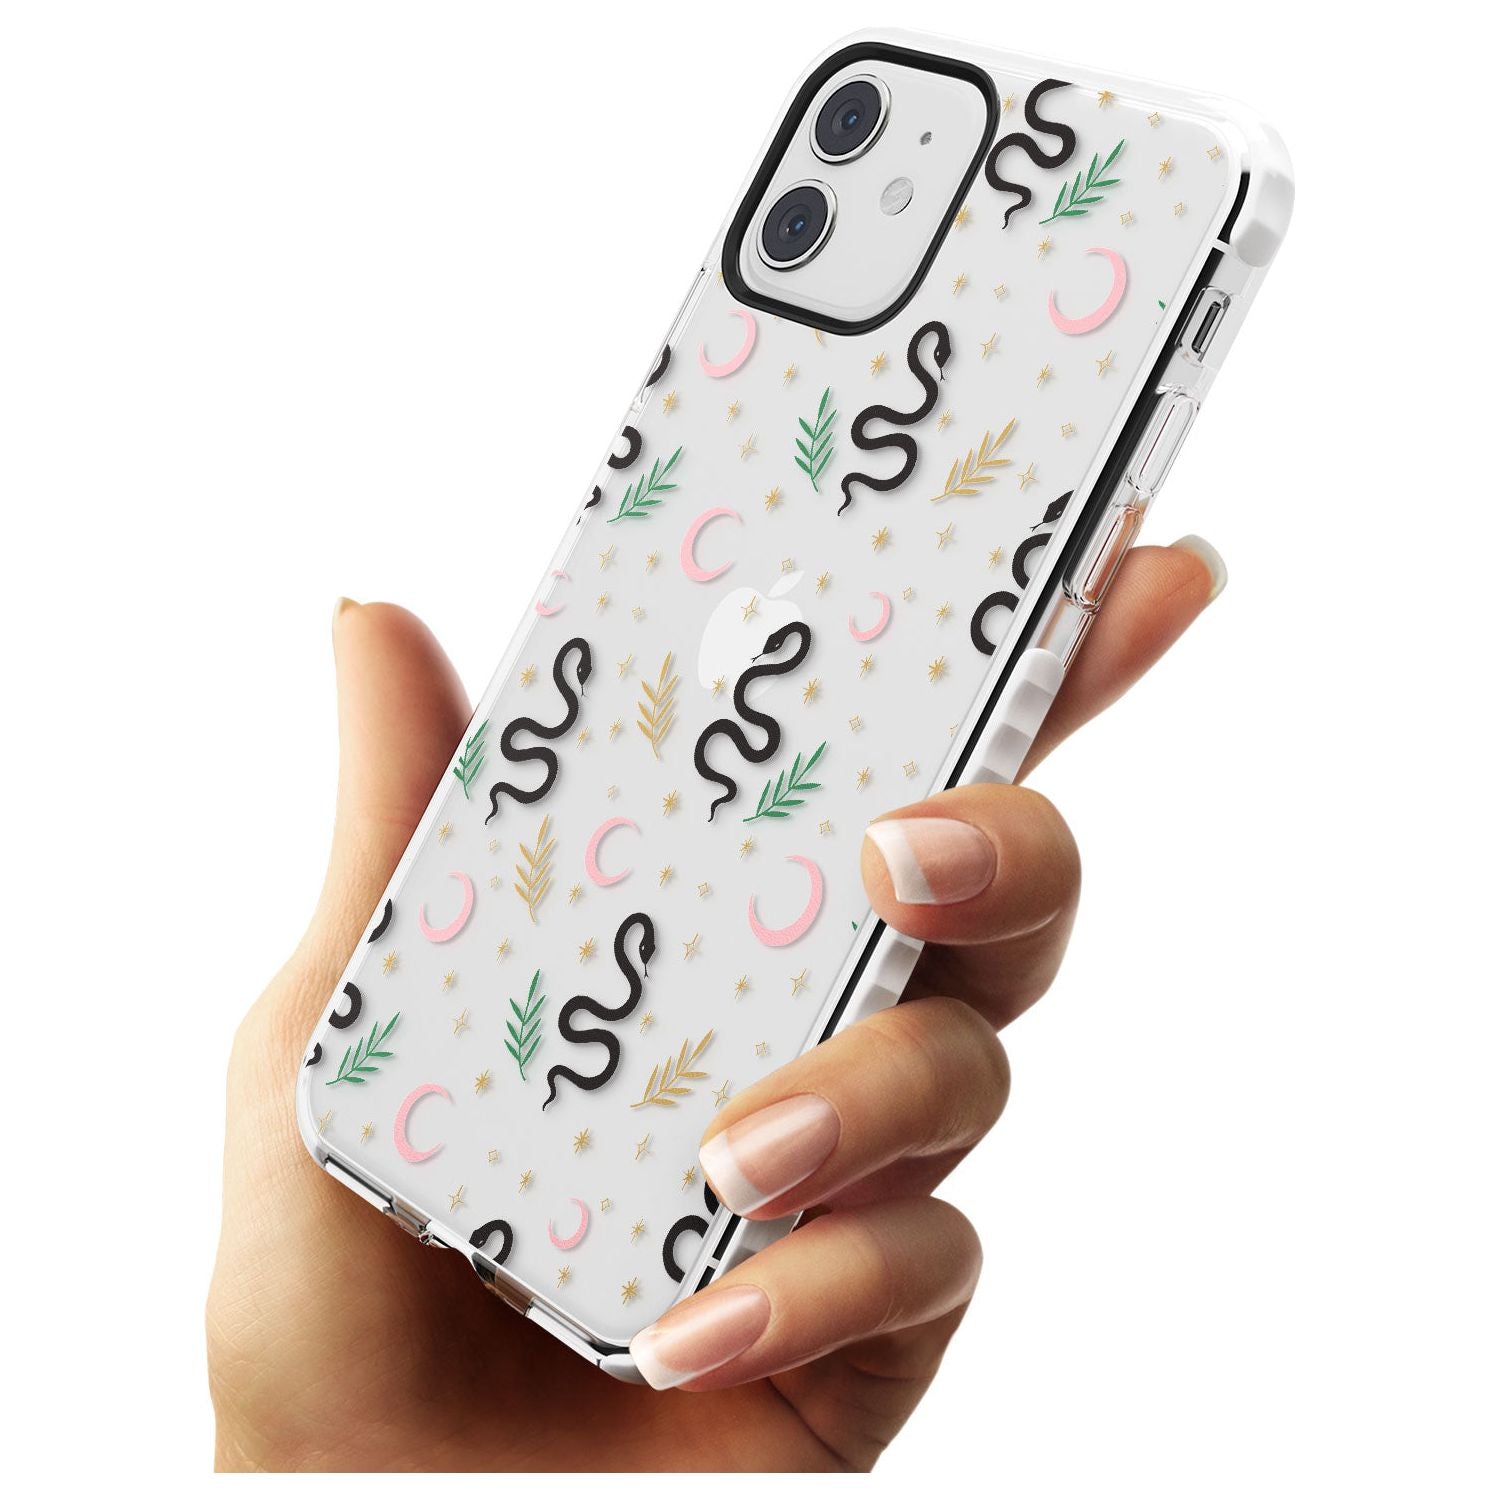 Snake & Moon Pattern (Clear) Slim TPU Phone Case for iPhone 11